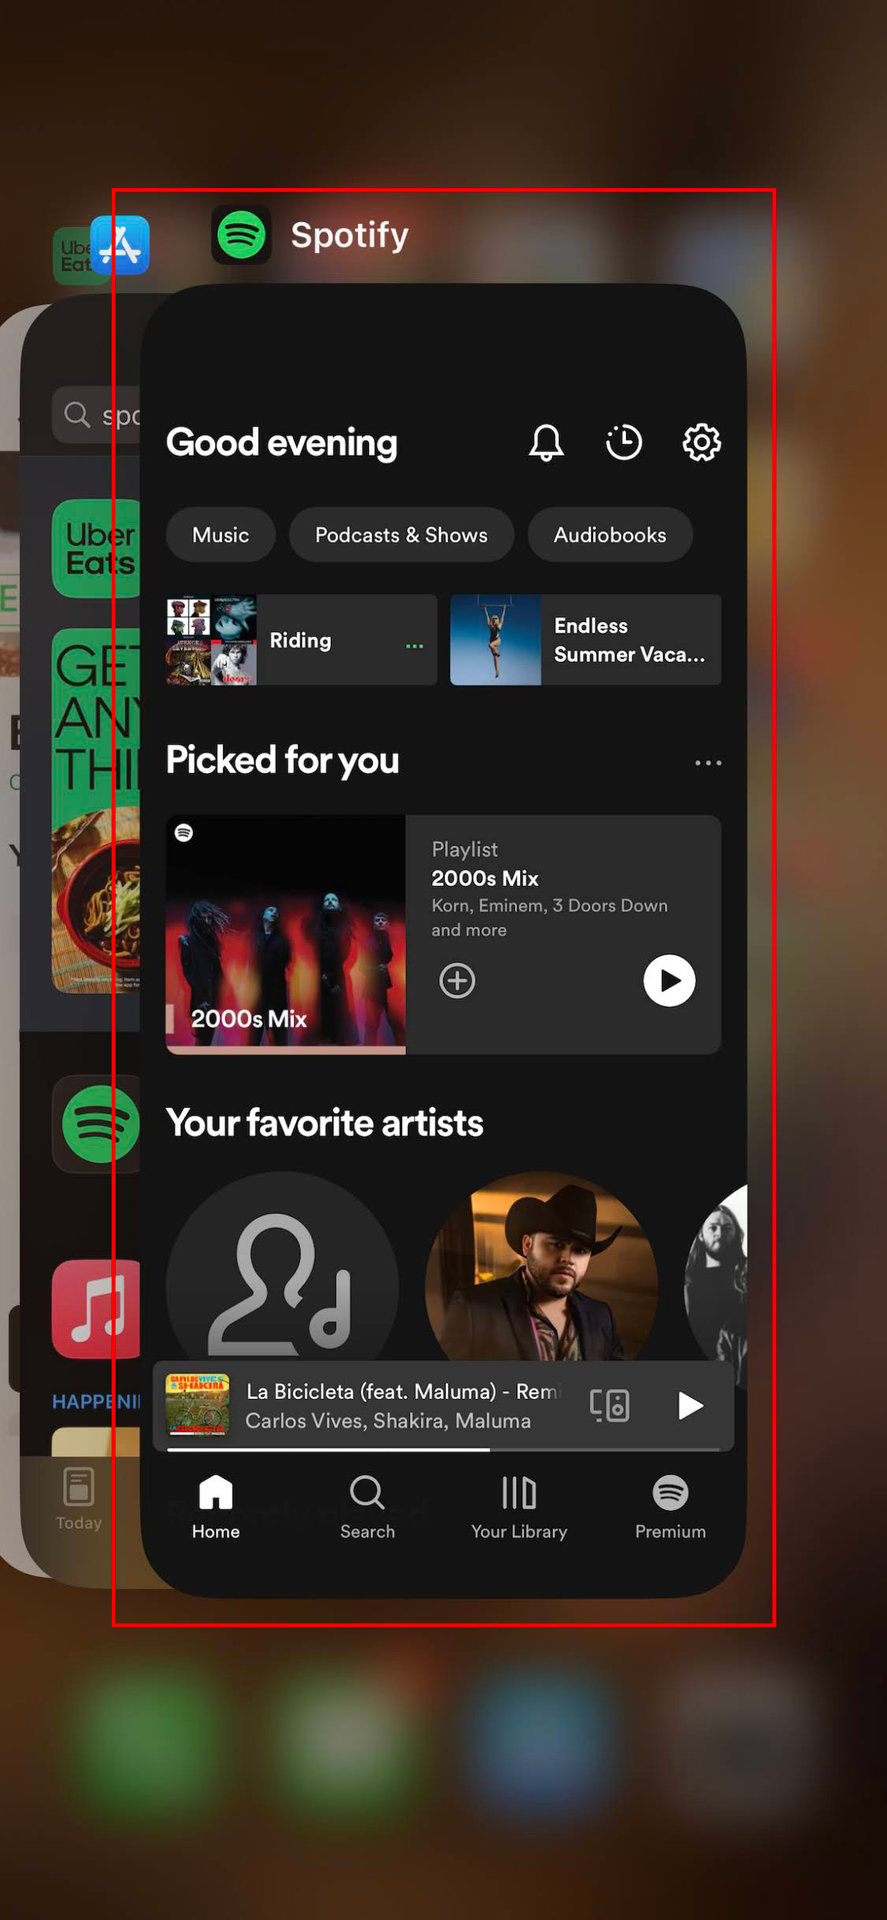 How to close Spotify on iOS 1